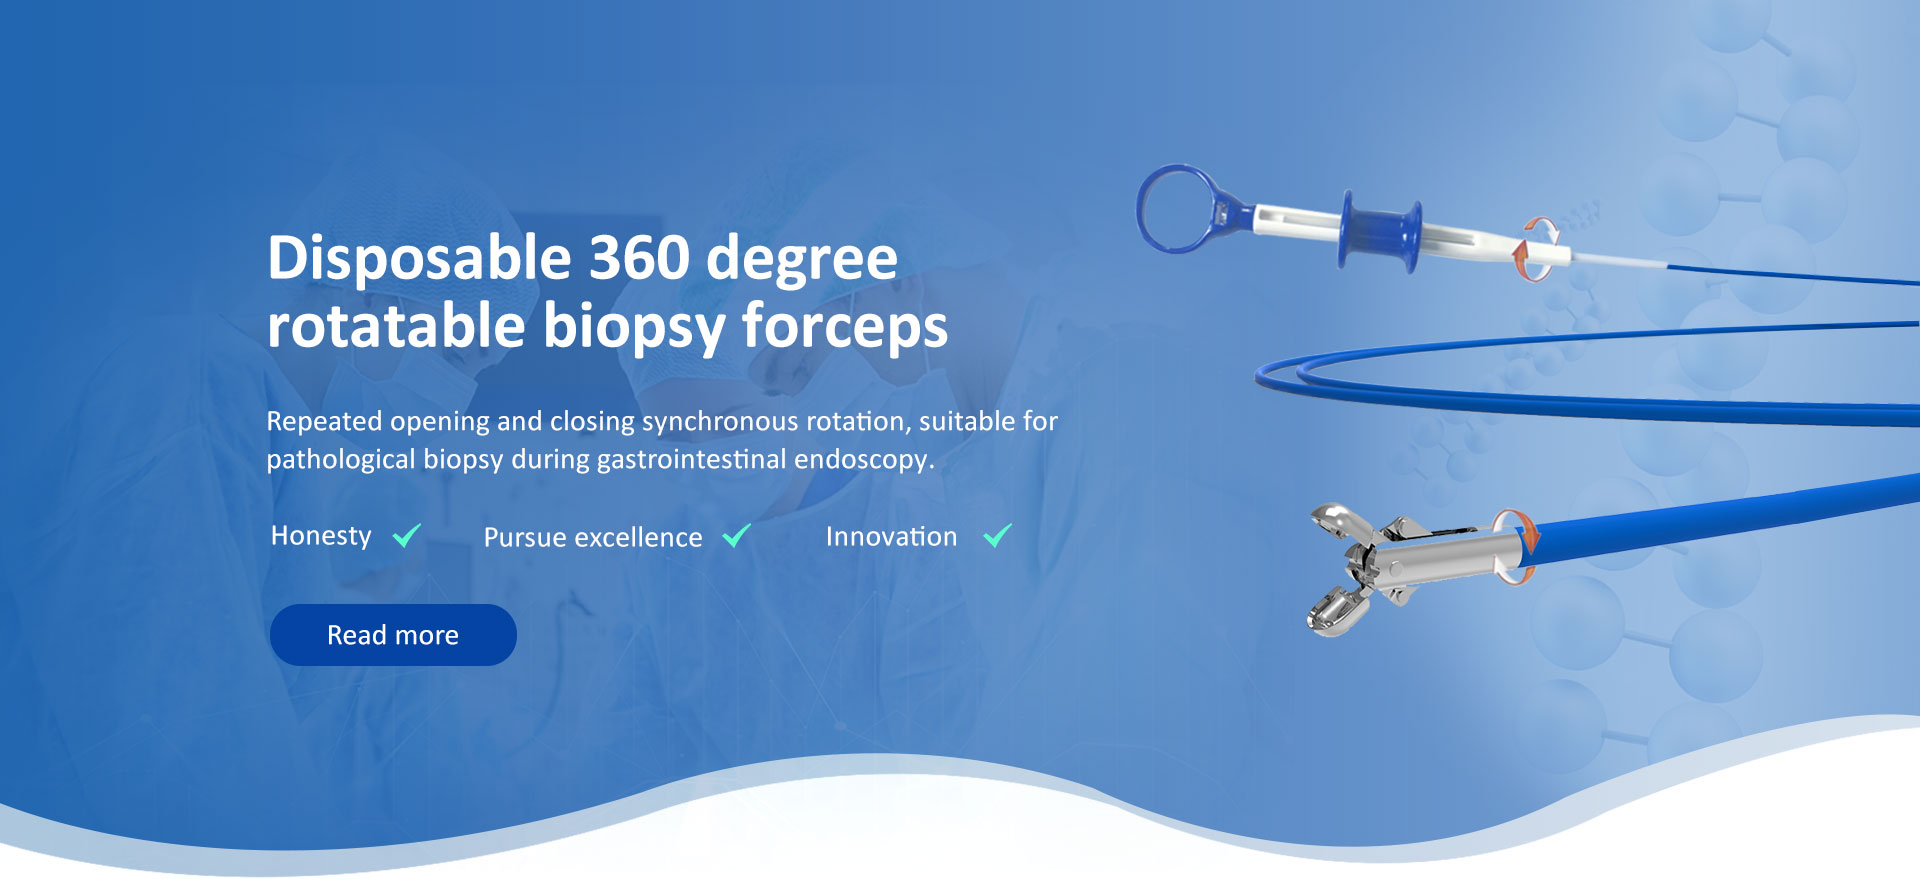 Disposable 360 degree rotatable biopsy forceps